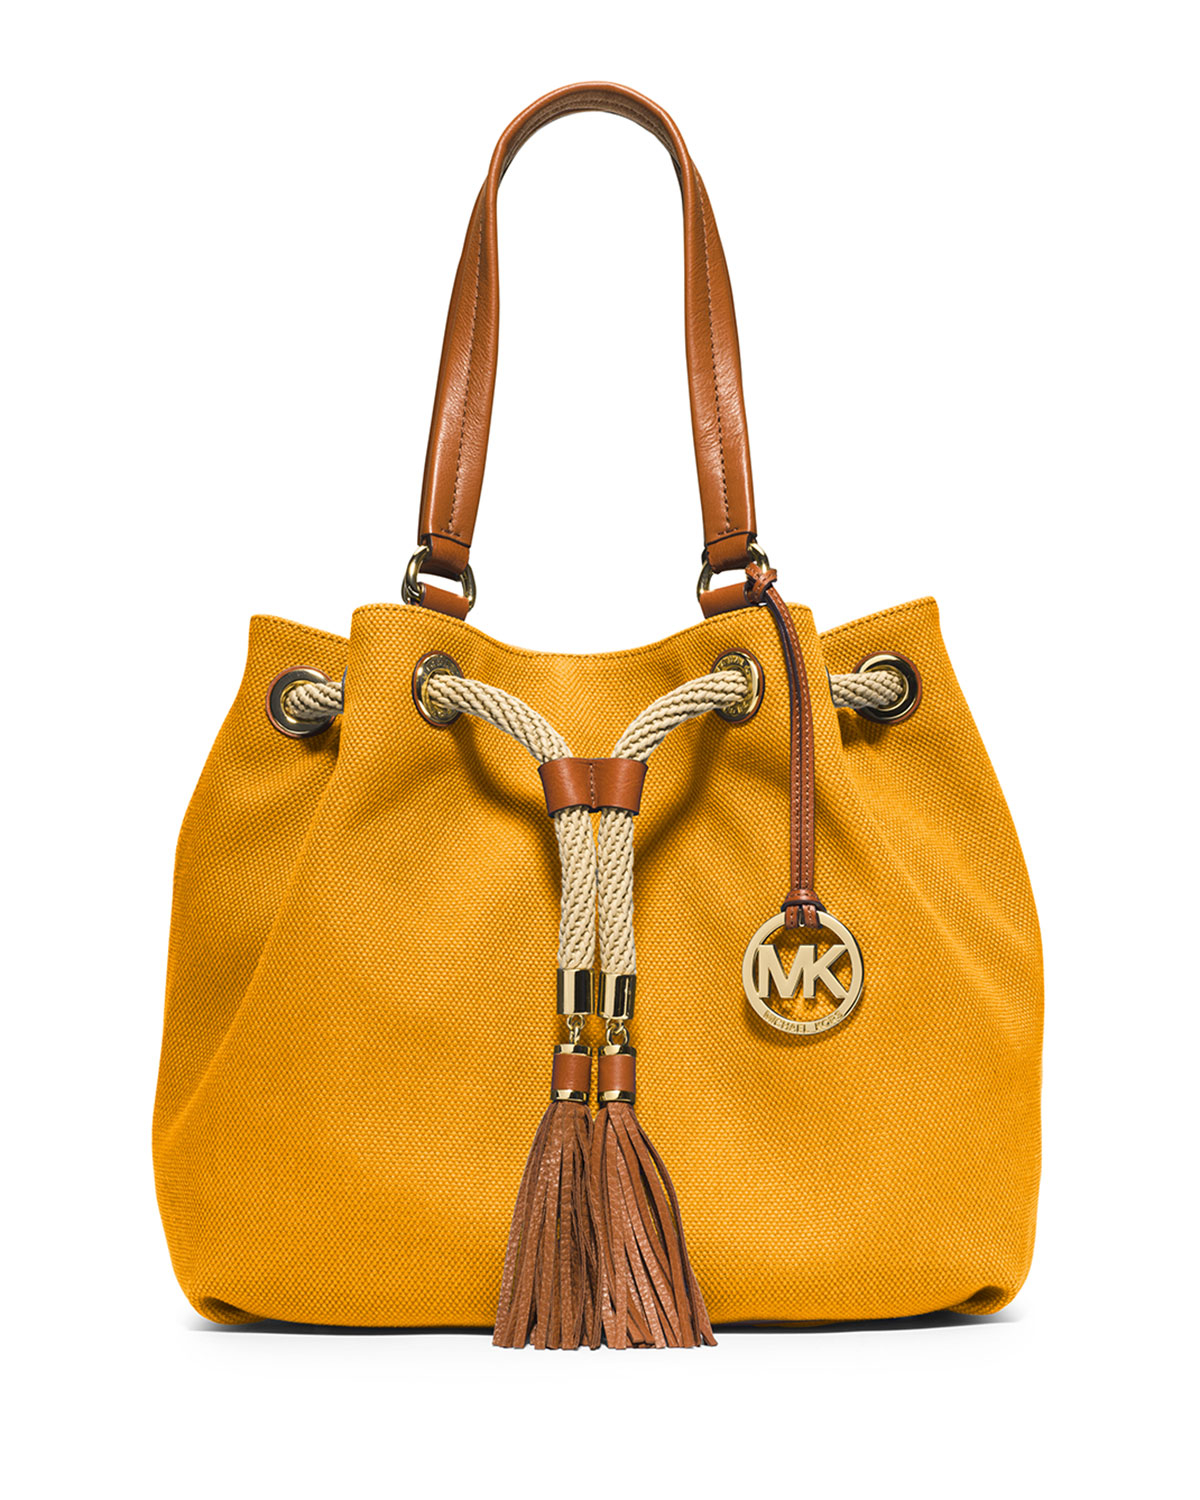 MICHAEL Michael Kors Marina Large Gathered Canvas Tote Bag in Yellow - Lyst